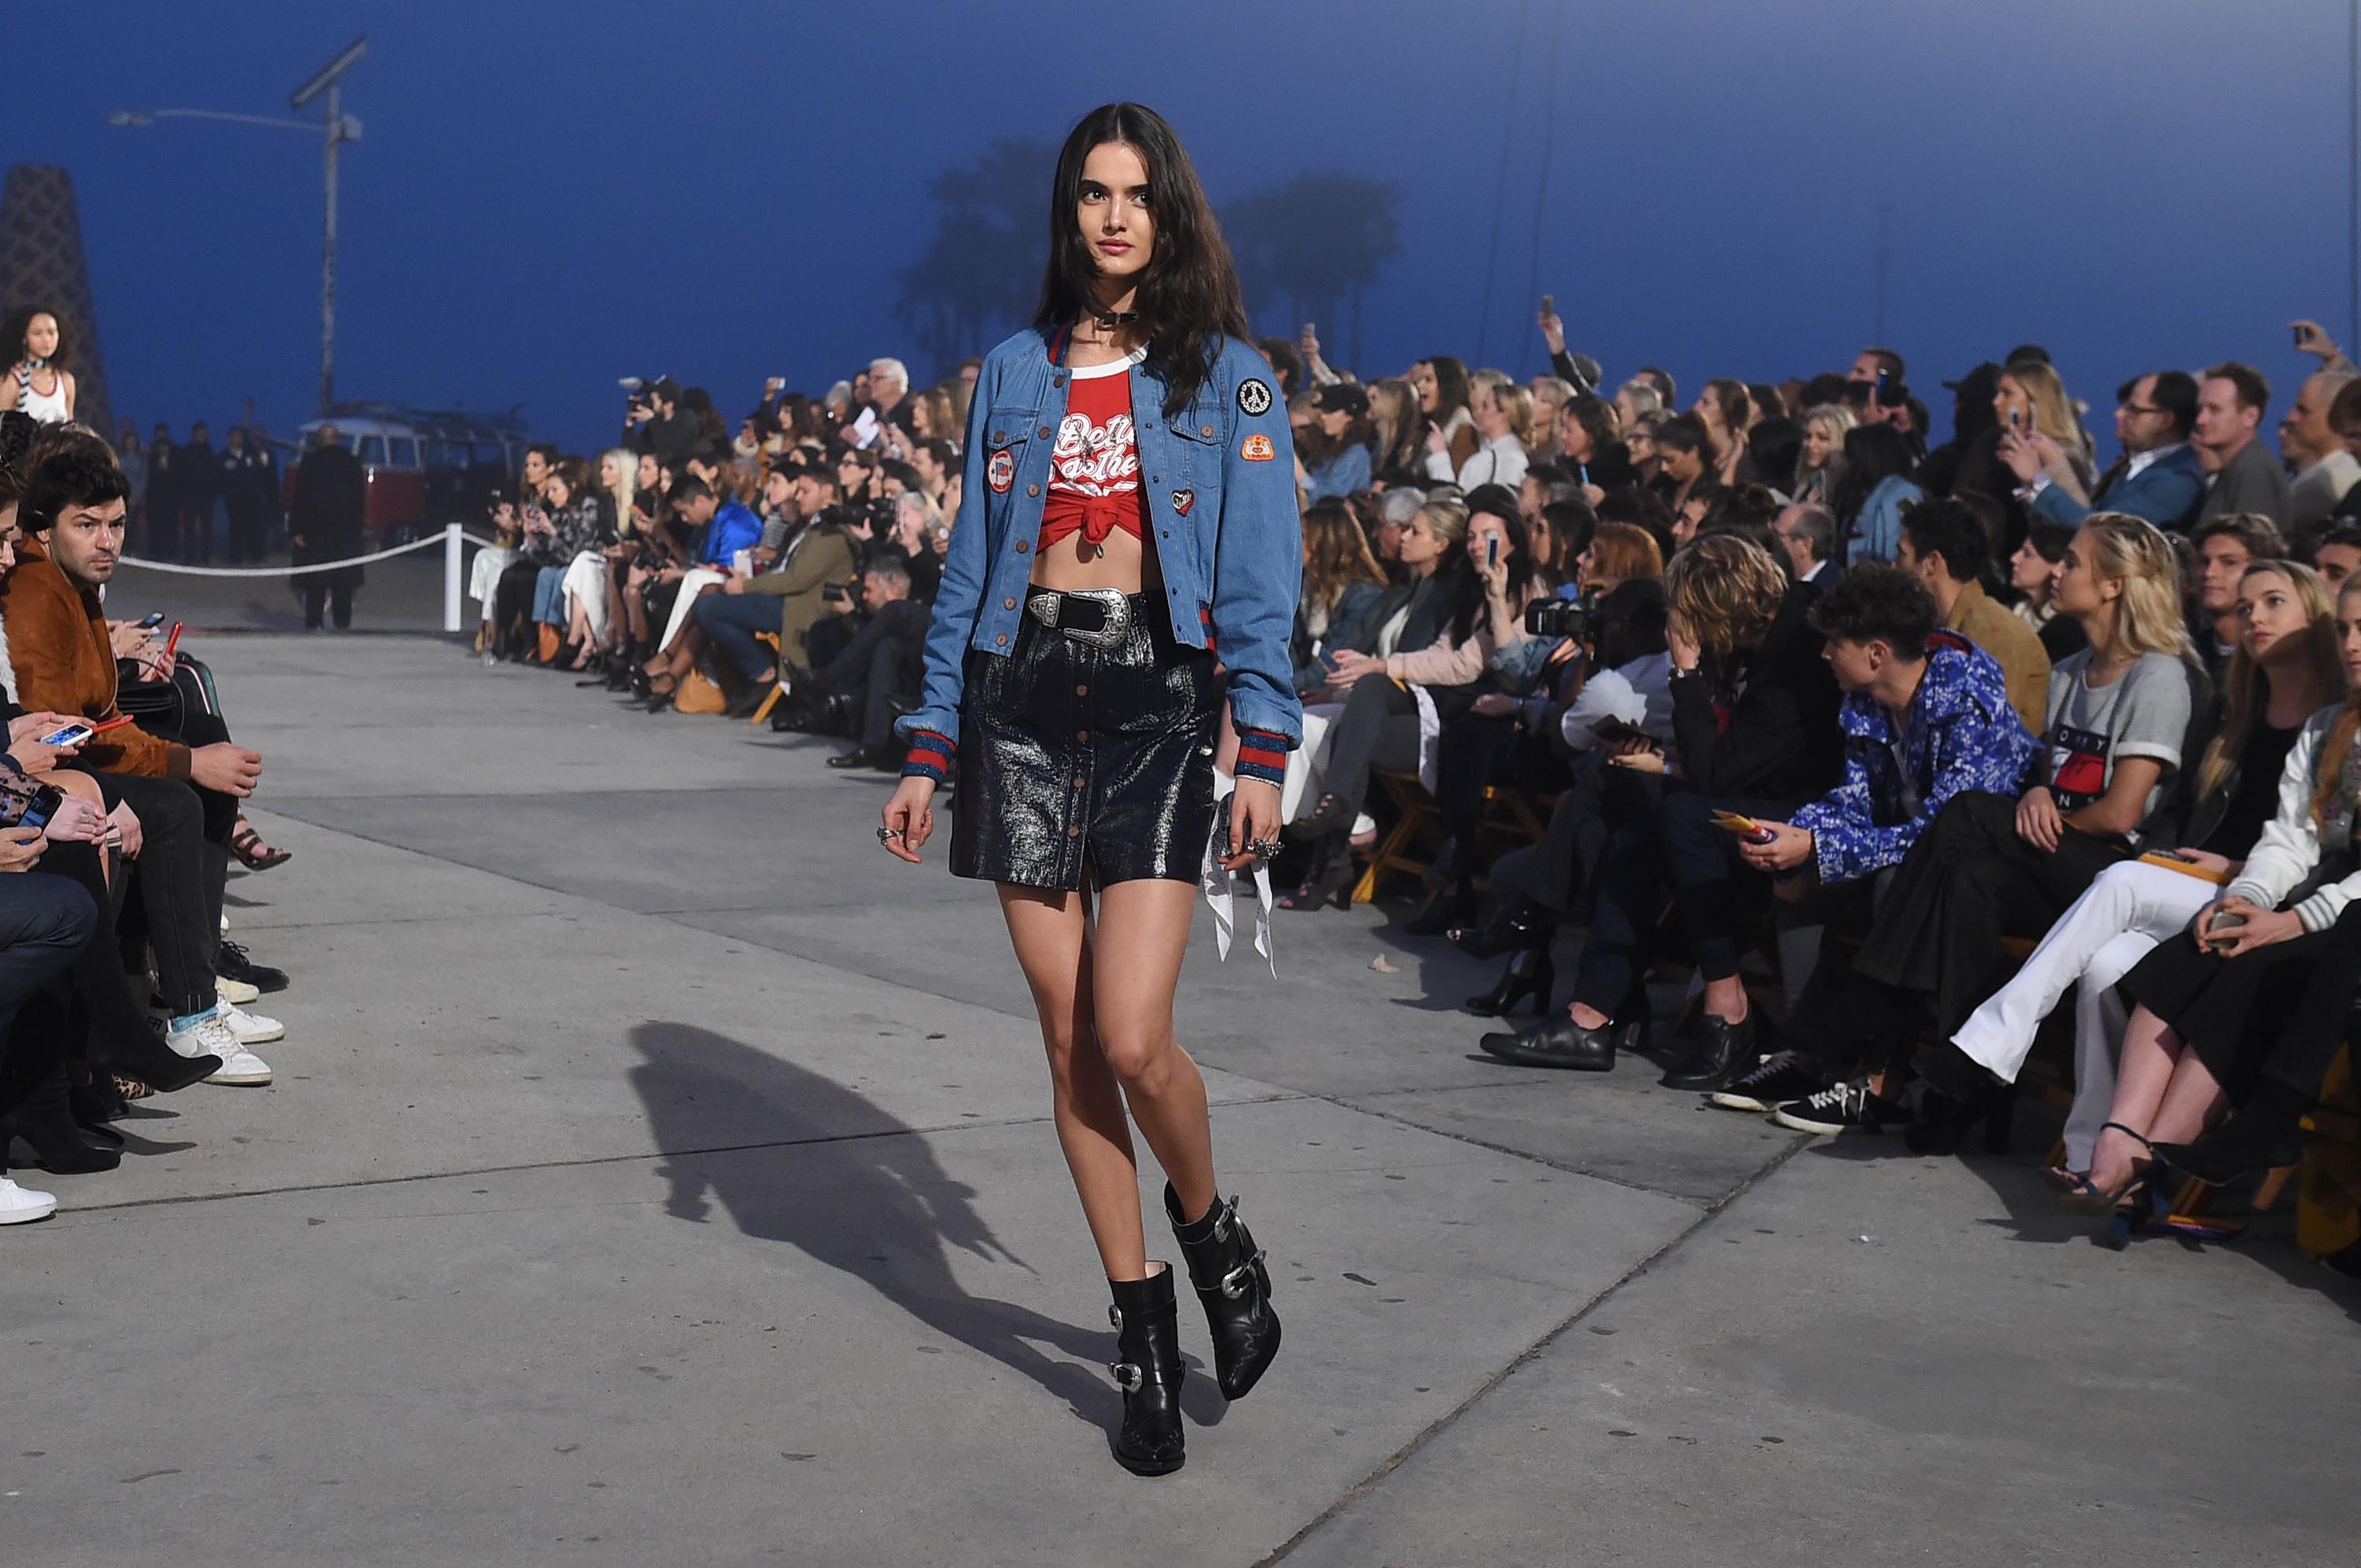 Camille Hurel walks the runway at the TommyLand Tommy Hilfiger Spring 2017 Fashion Show